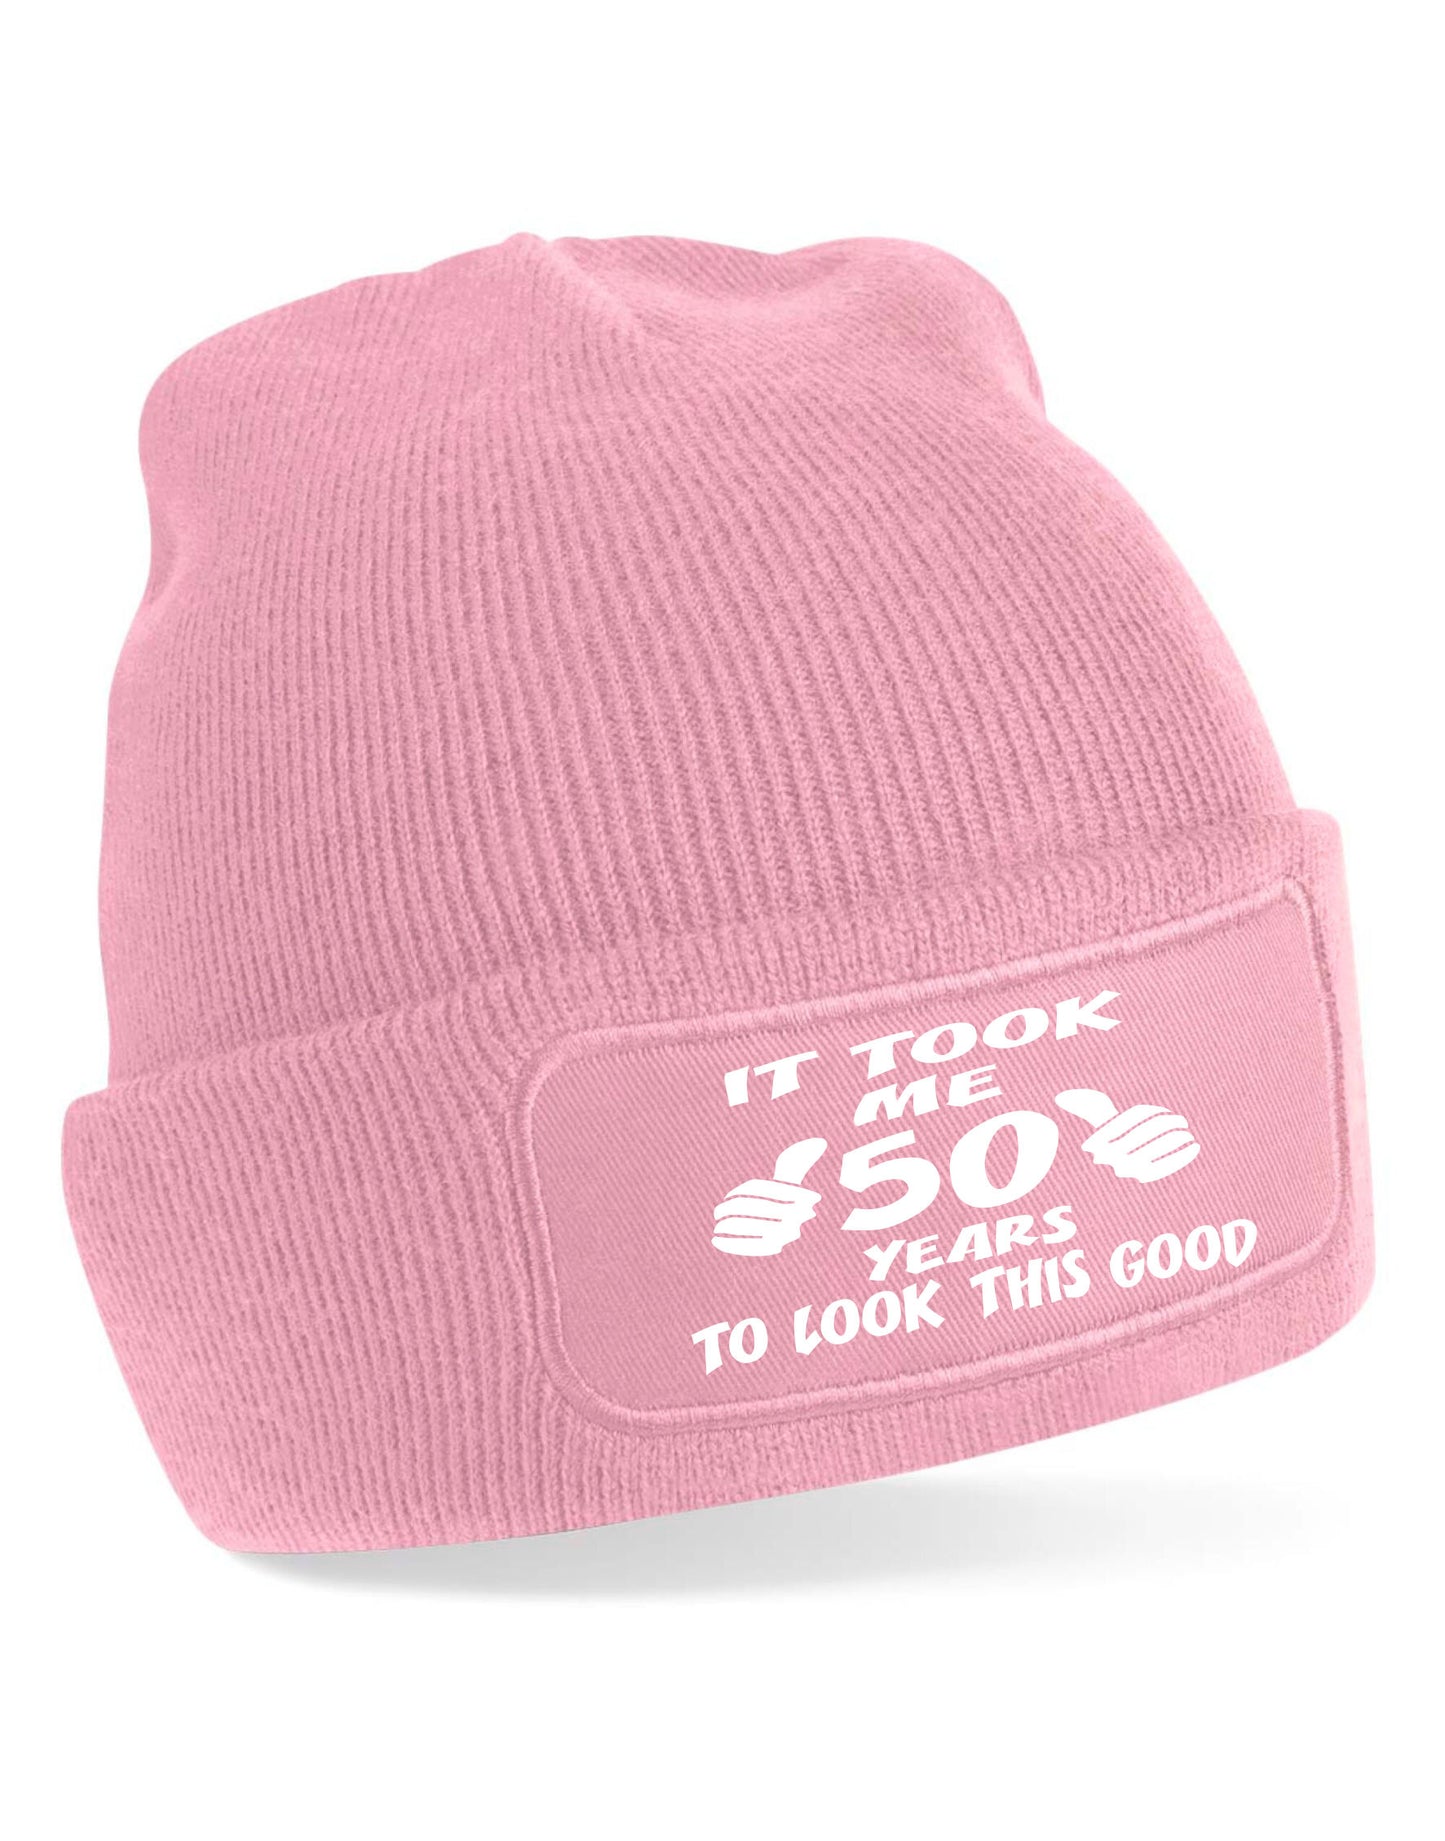 It Took 50 Years To Look This Good Beanie Hat 50th Birthday Gift Men & Women